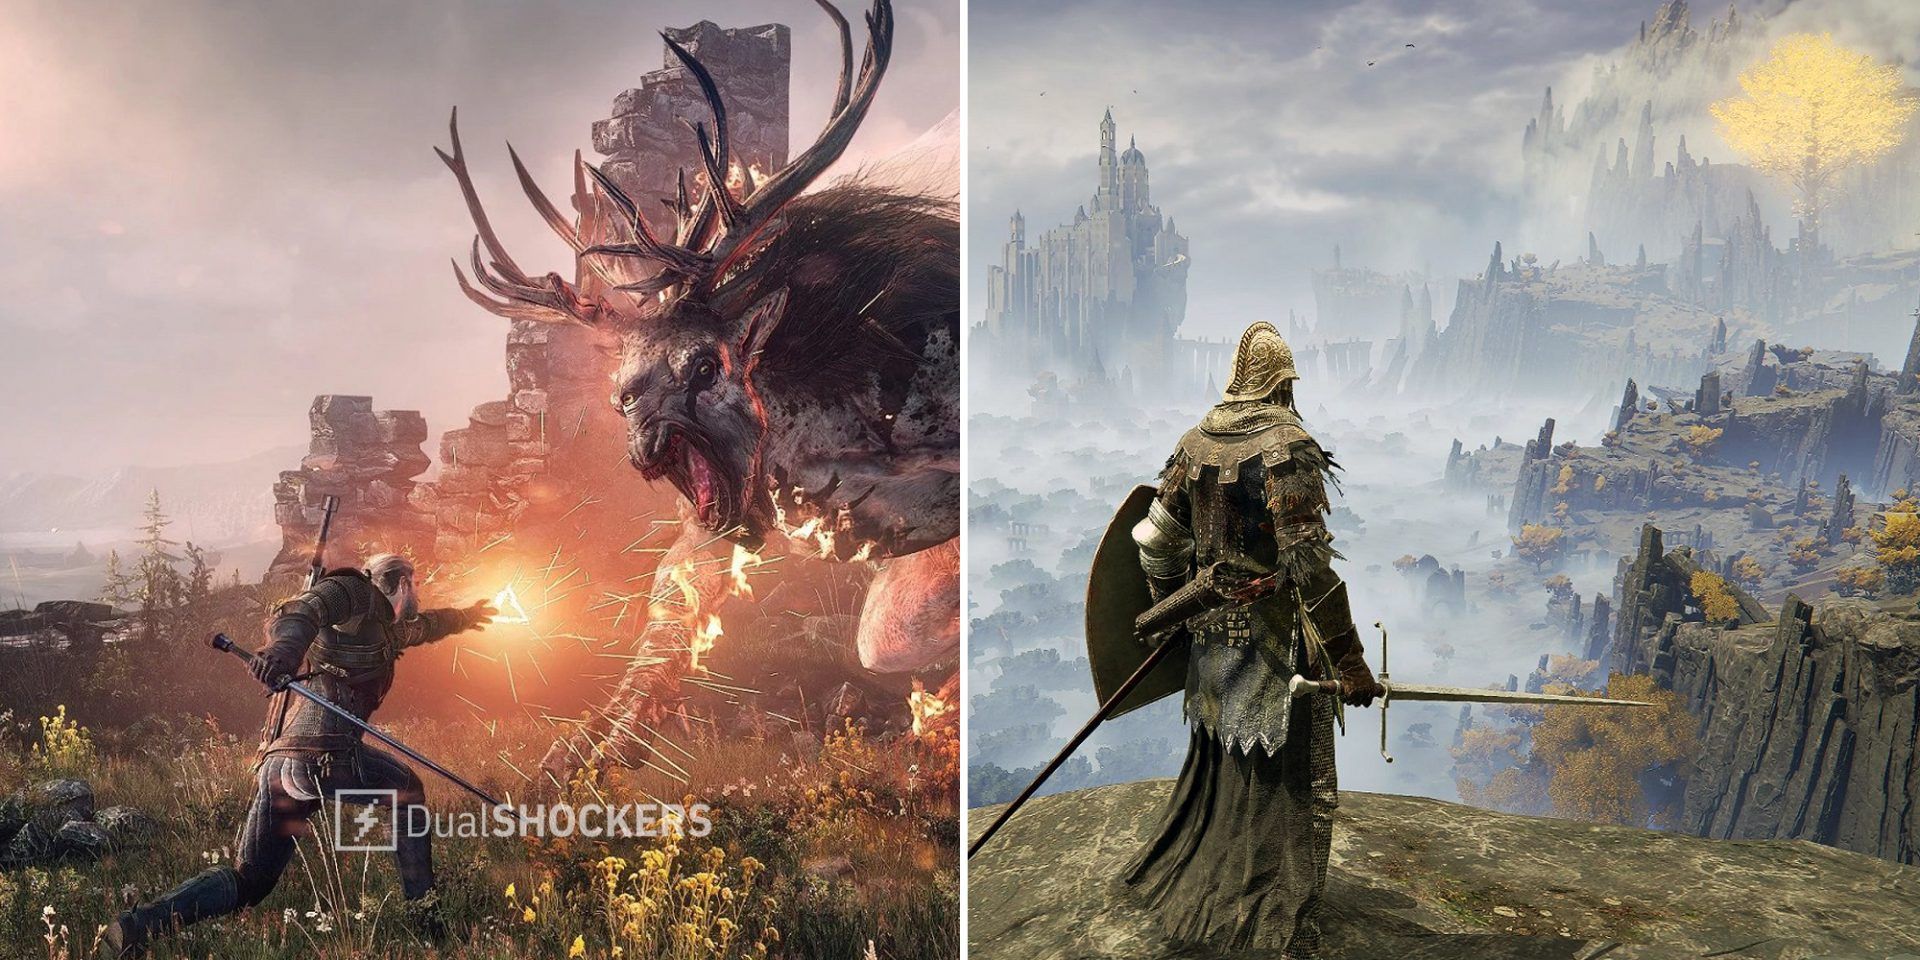 The Witcher 3 Geralt of Rivia fighting a monster on left, Elden Ring player looking out over the landscape on right